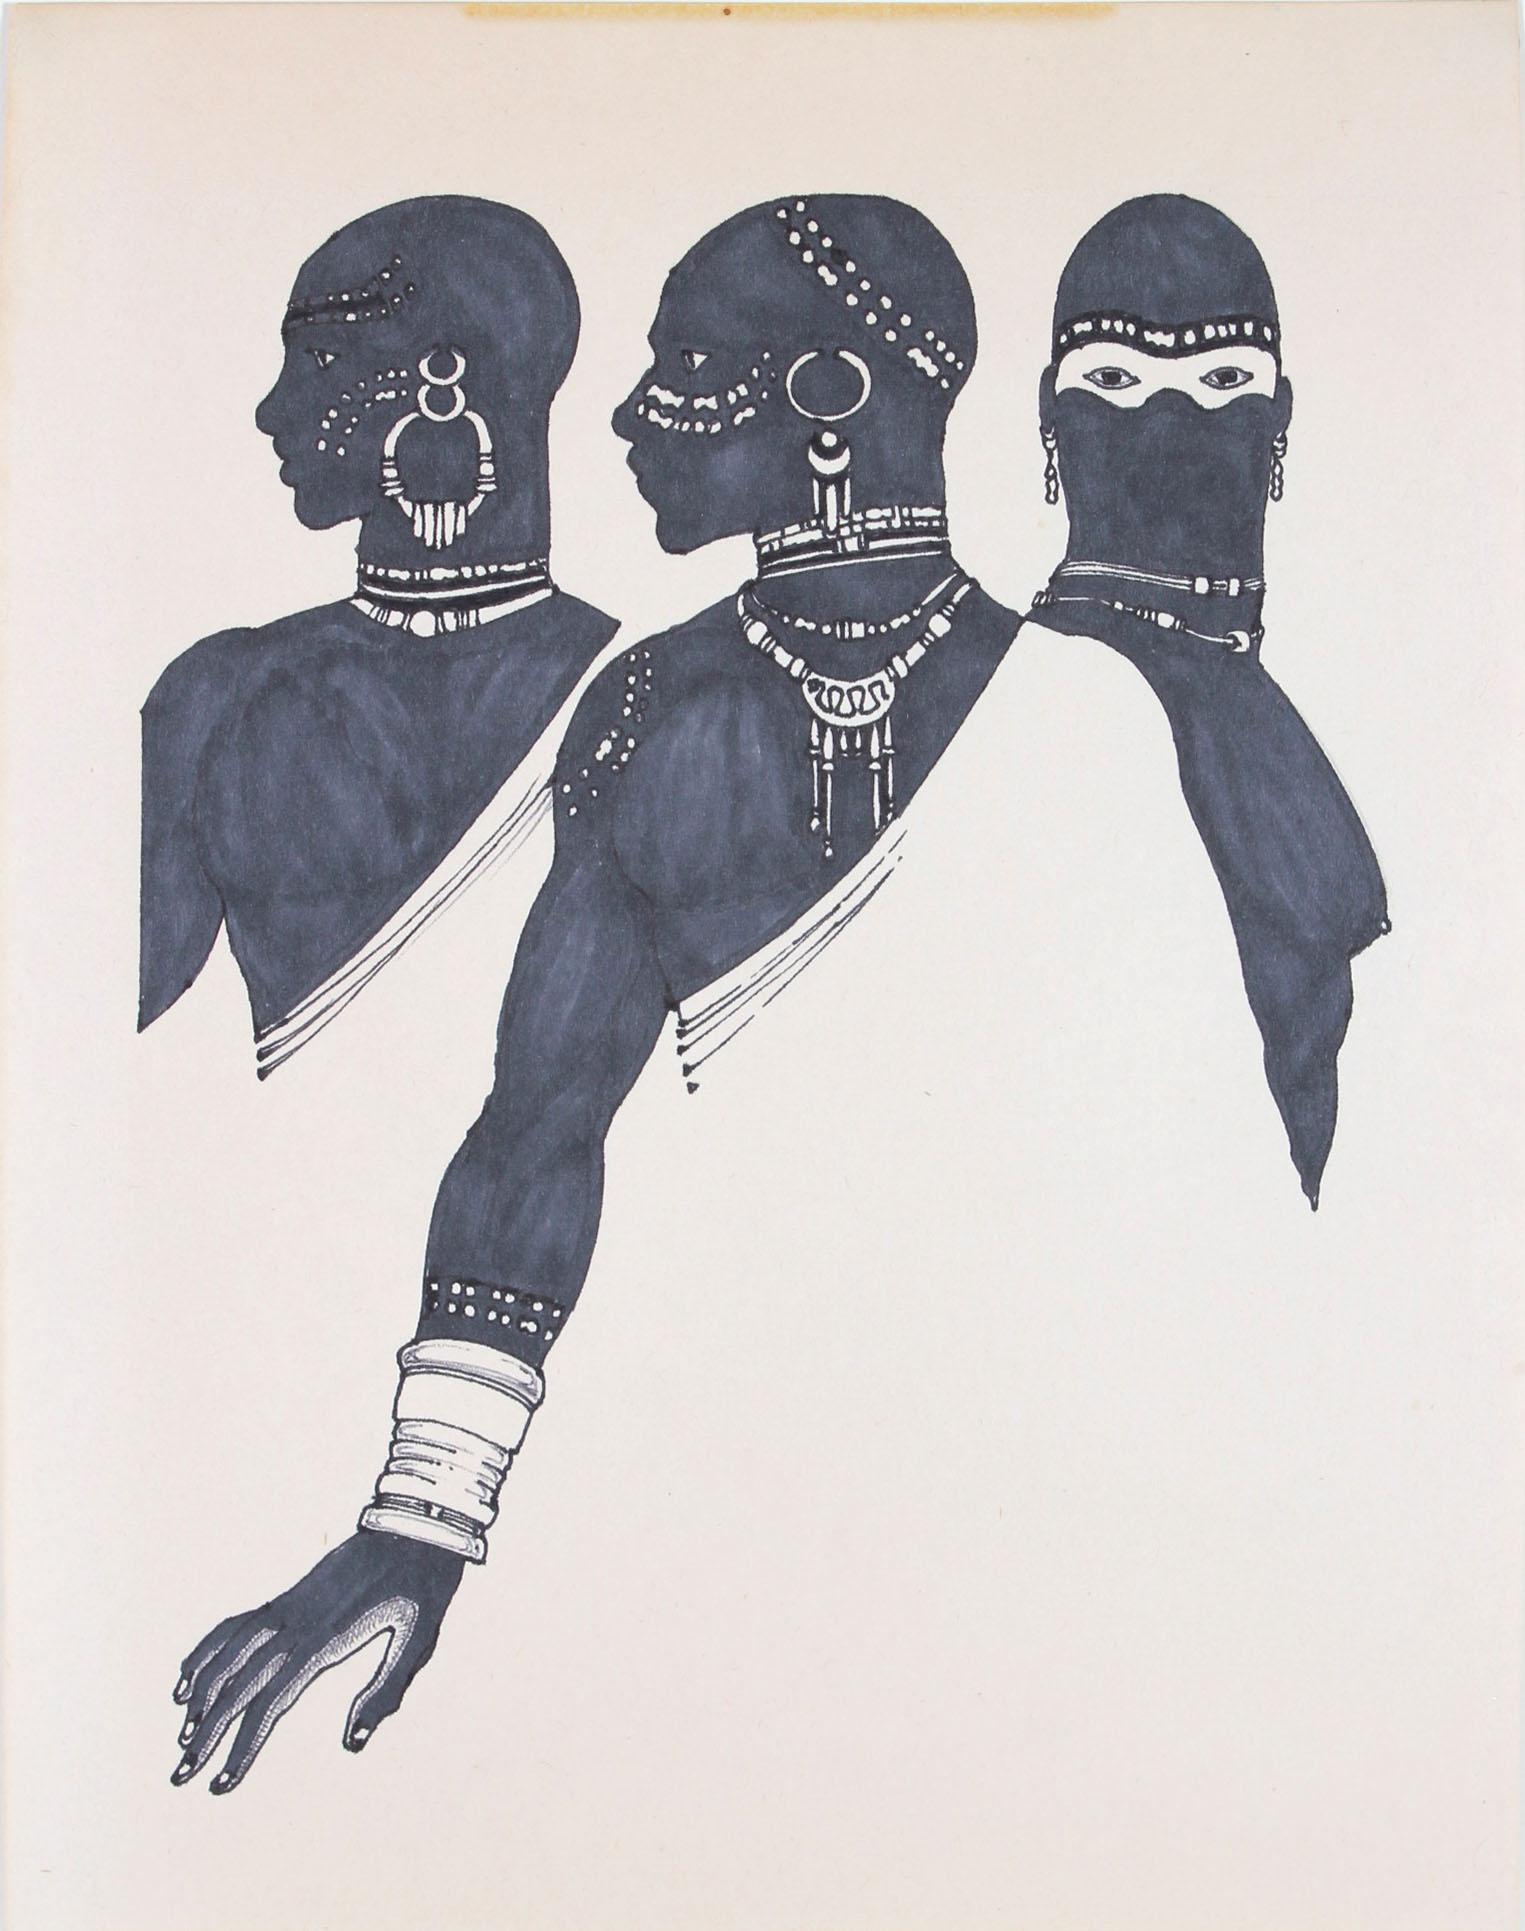 Unknown Portrait - 1970s Drawing of Three Figures in Ink